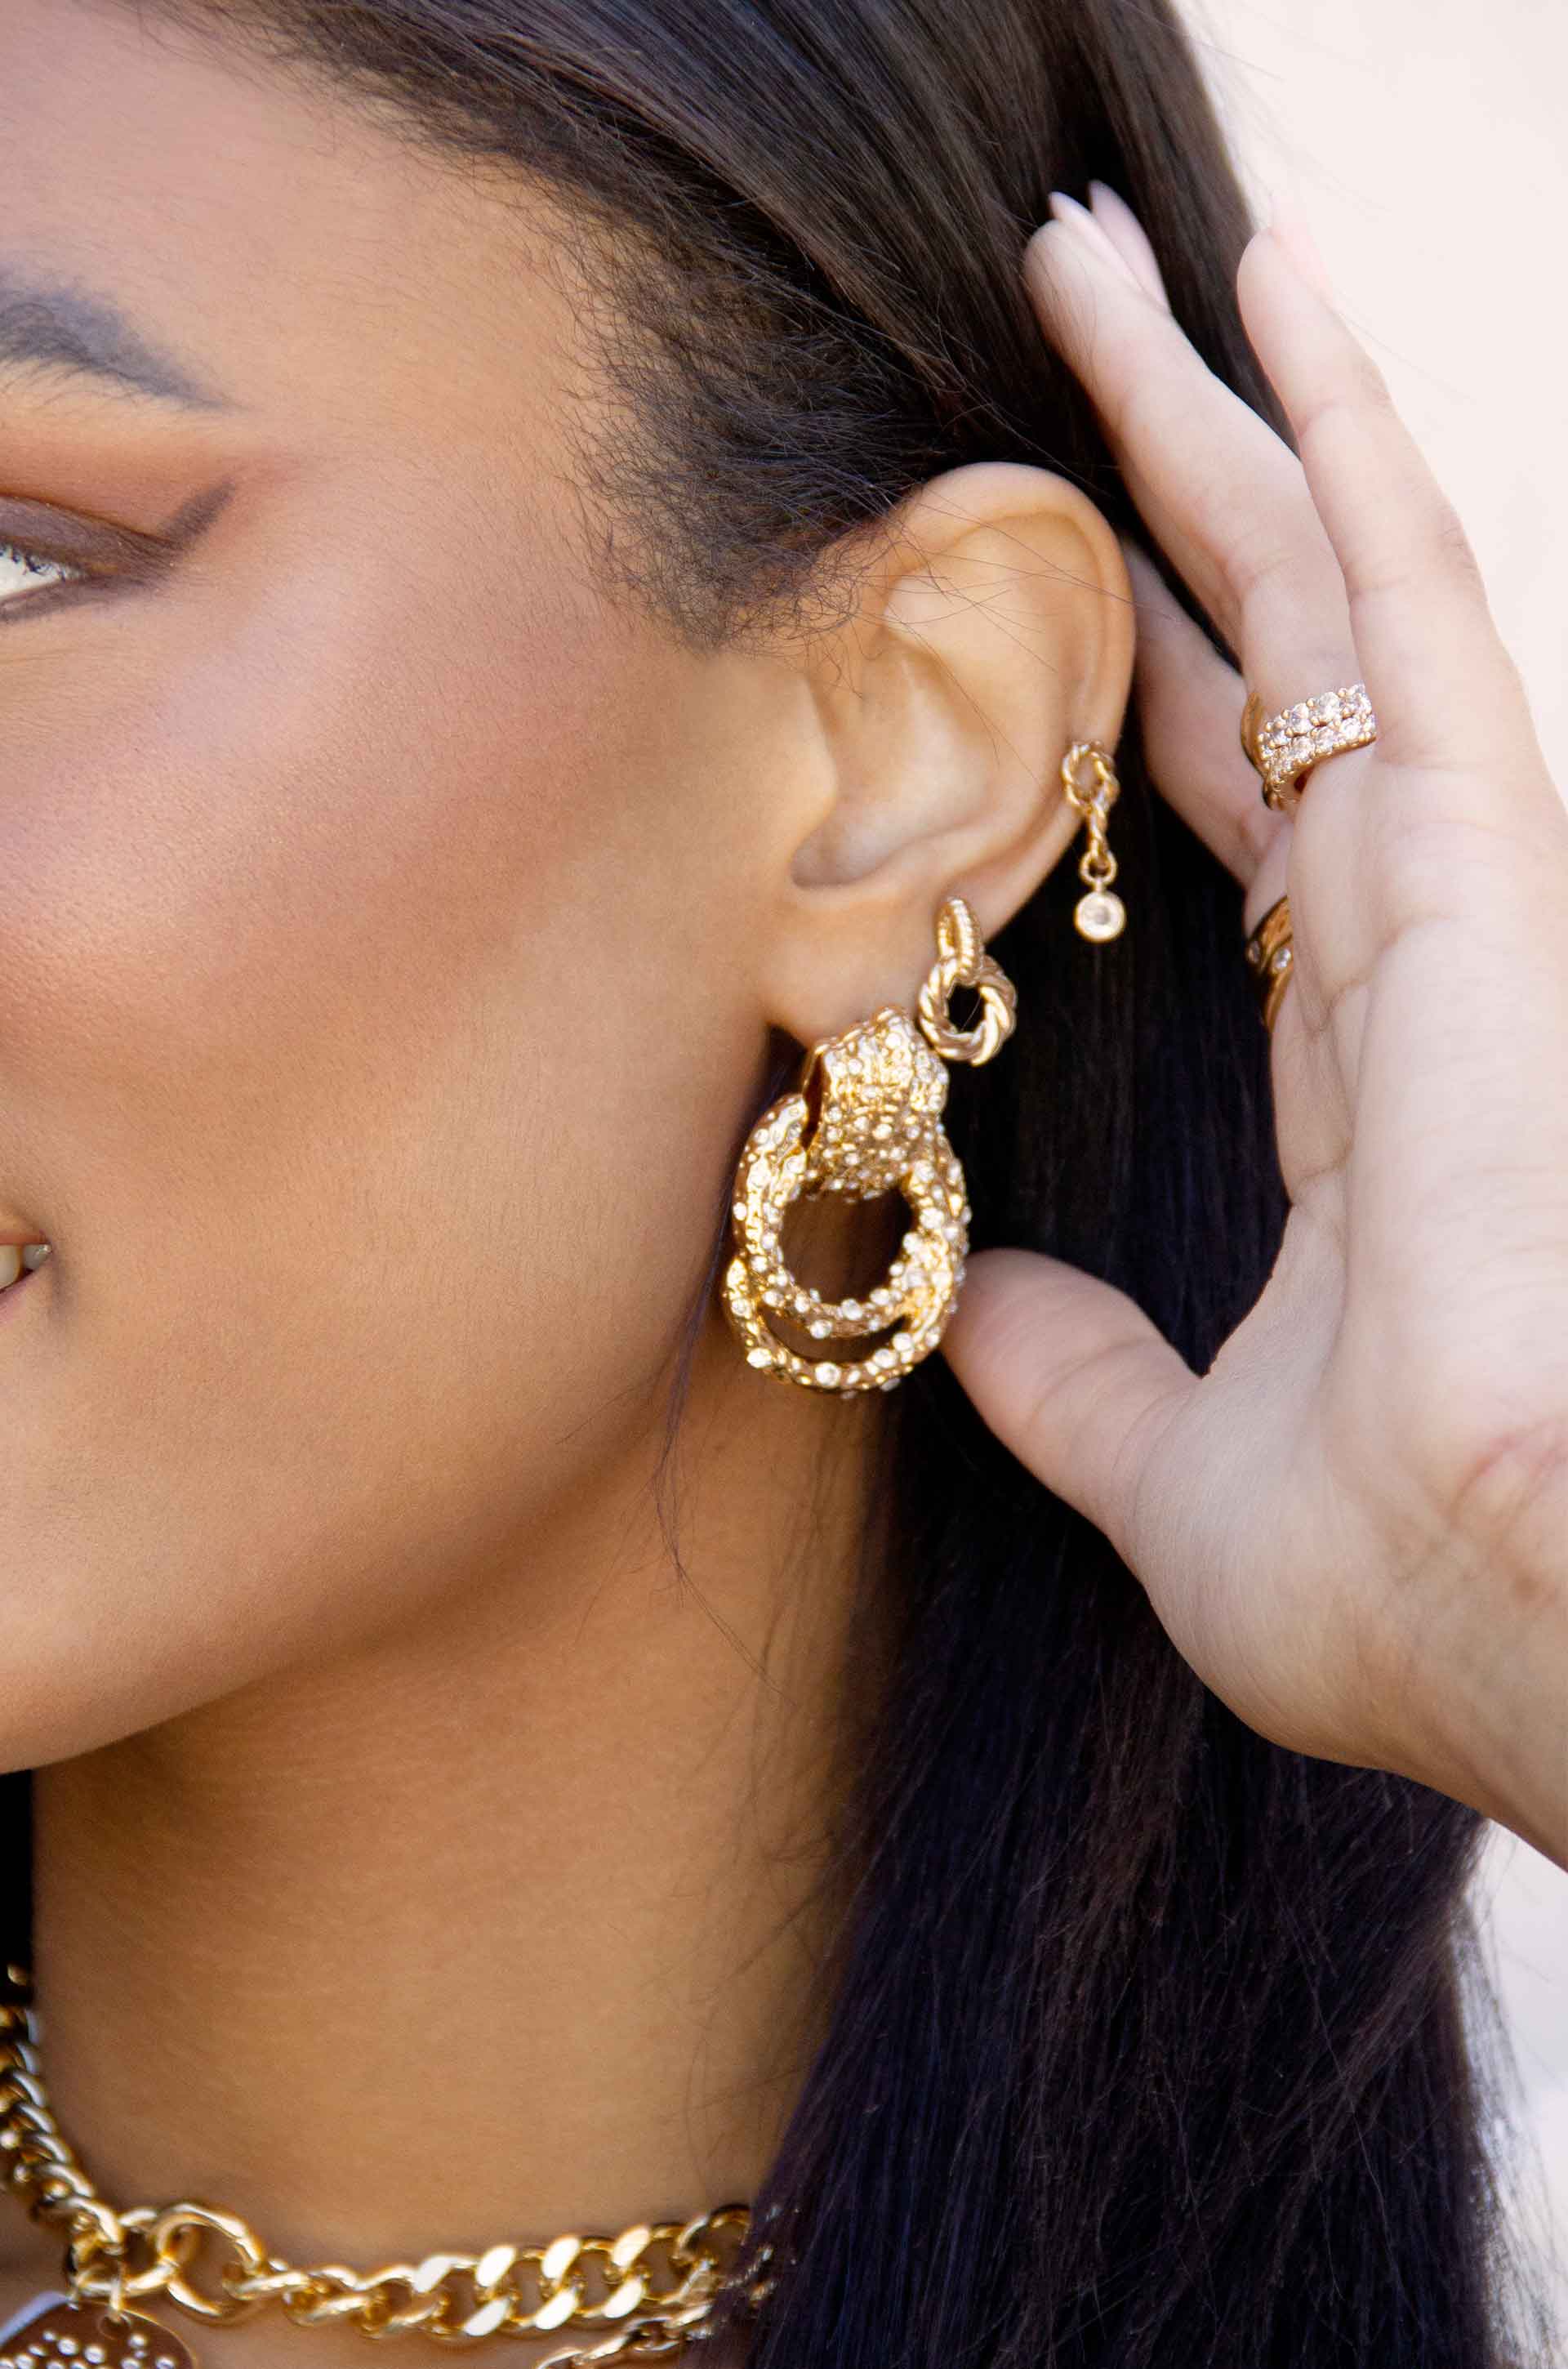 Only Royalty 18k Gold Plated Crystal Earrings on a model